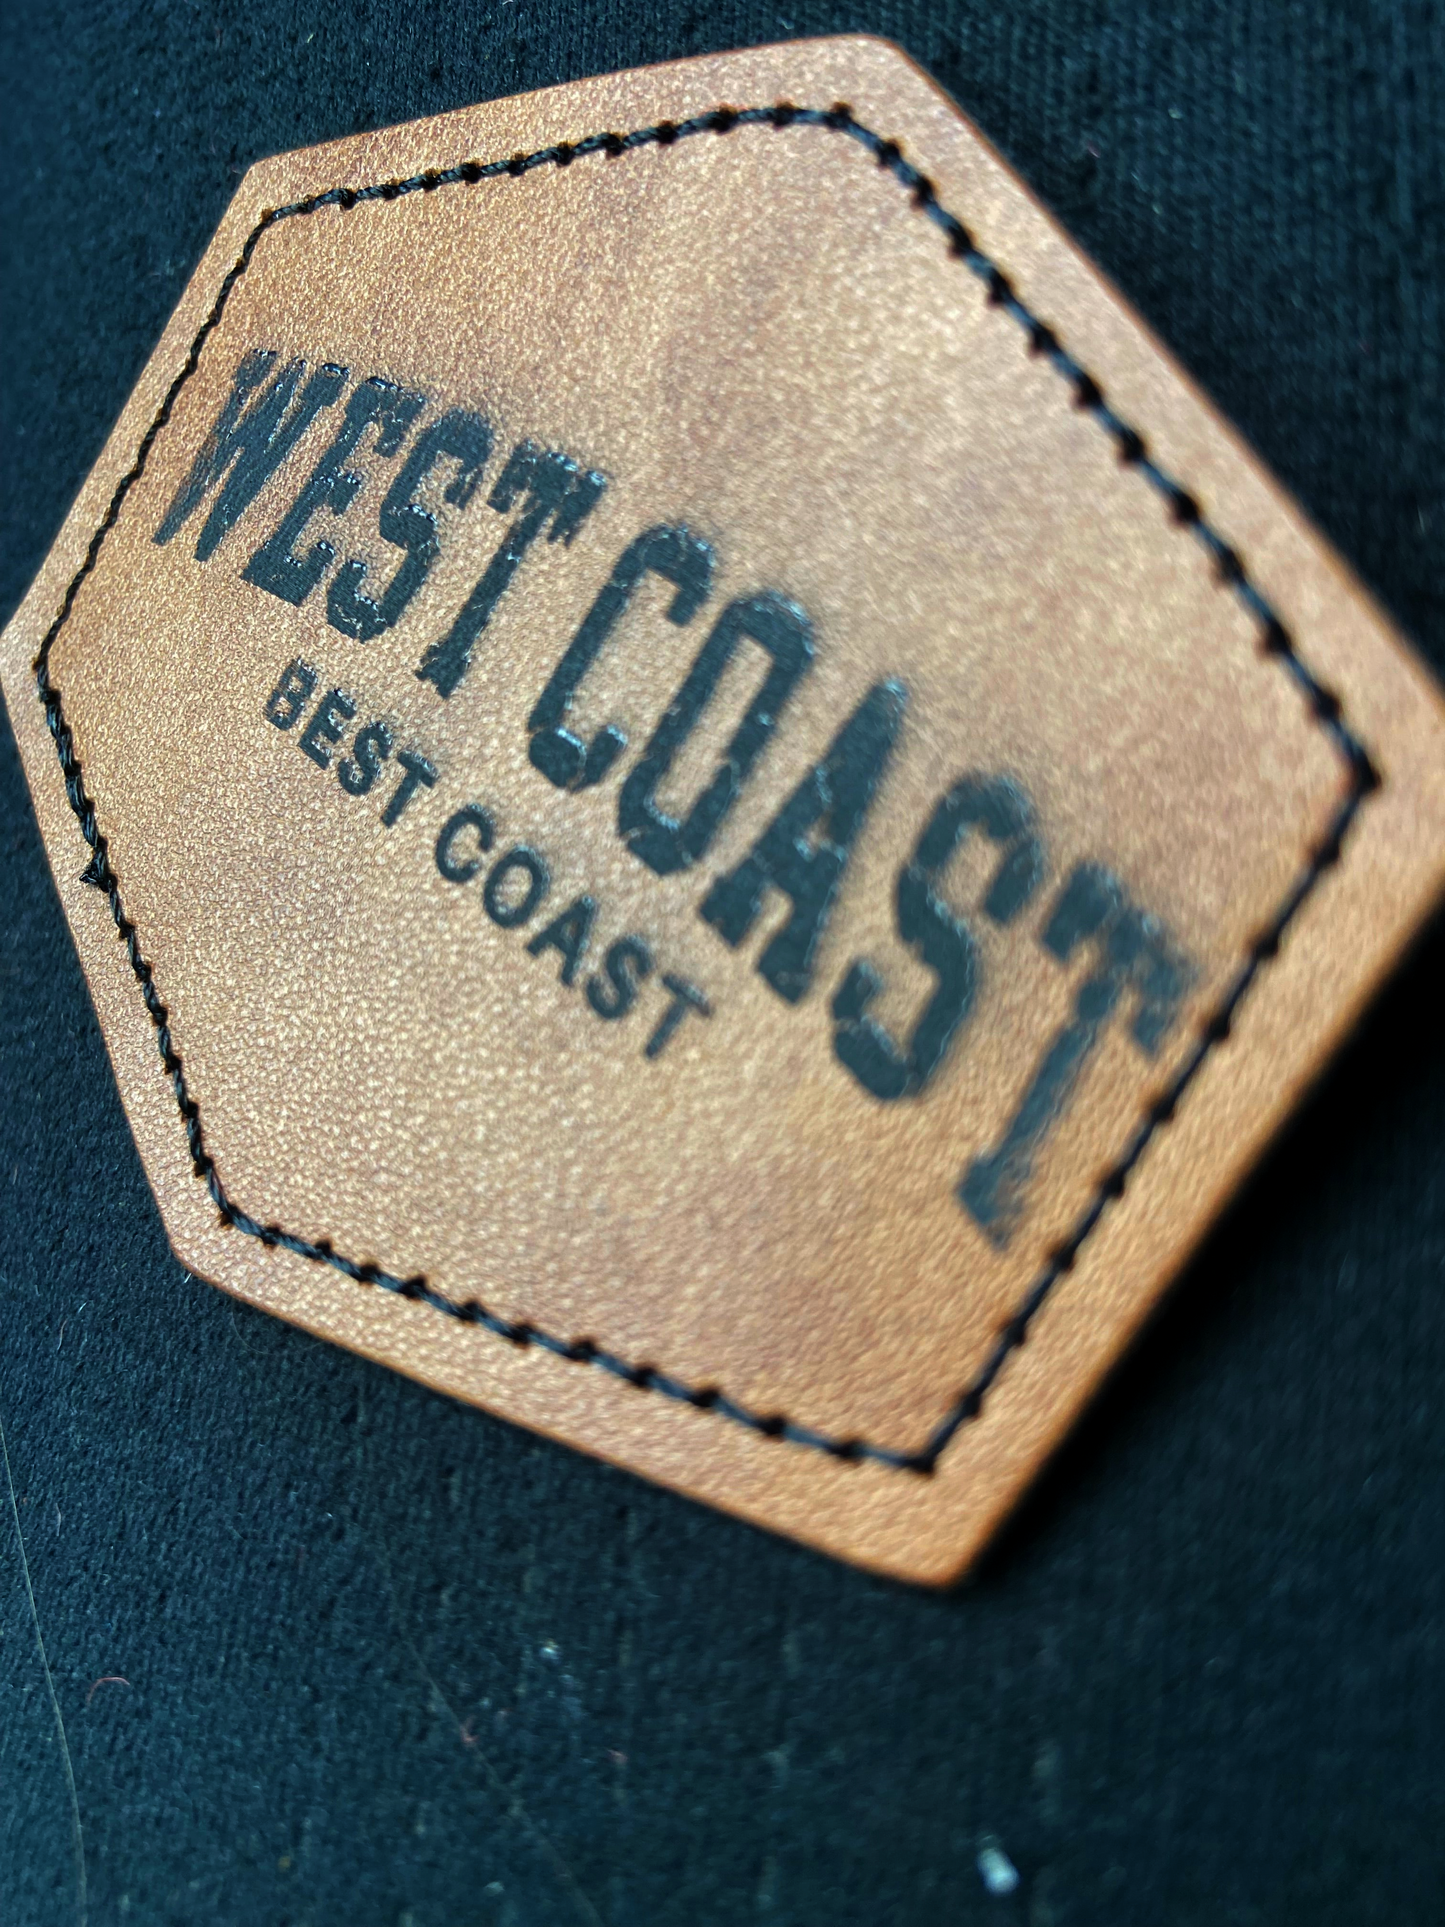 a leather label that says west coast best coast